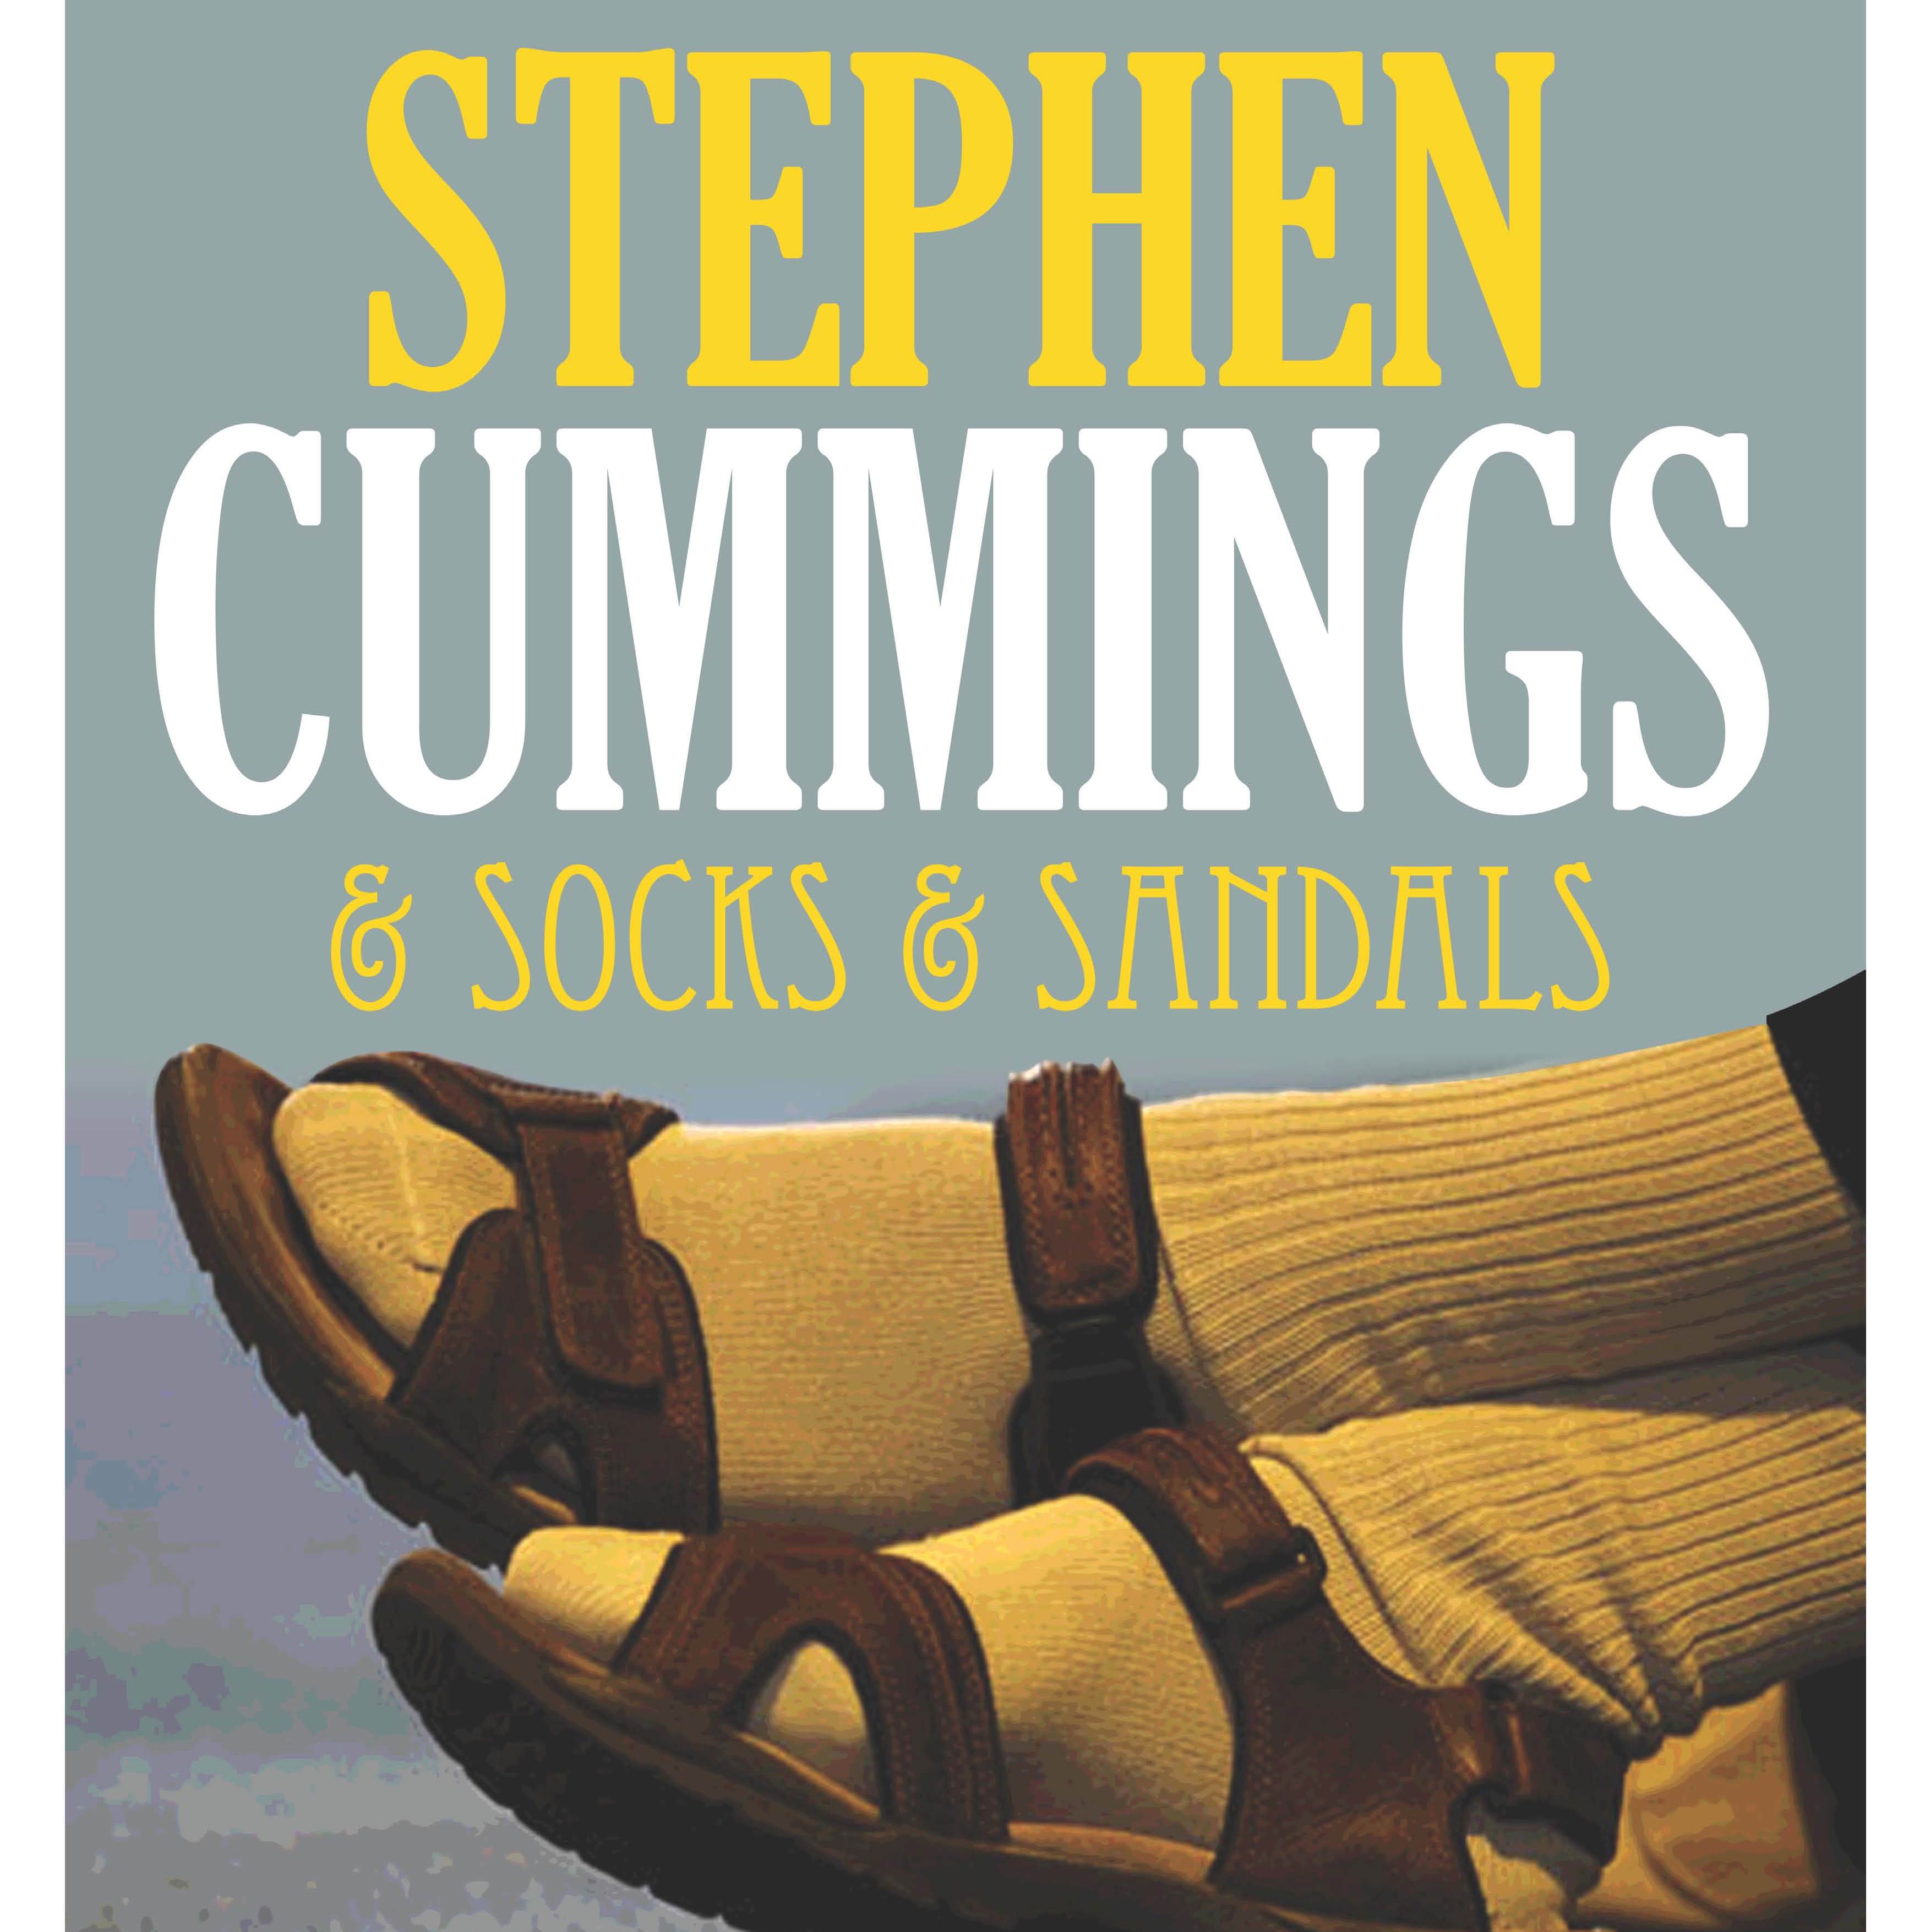 Stephen-Cummings-with-Socks-and-Sandals